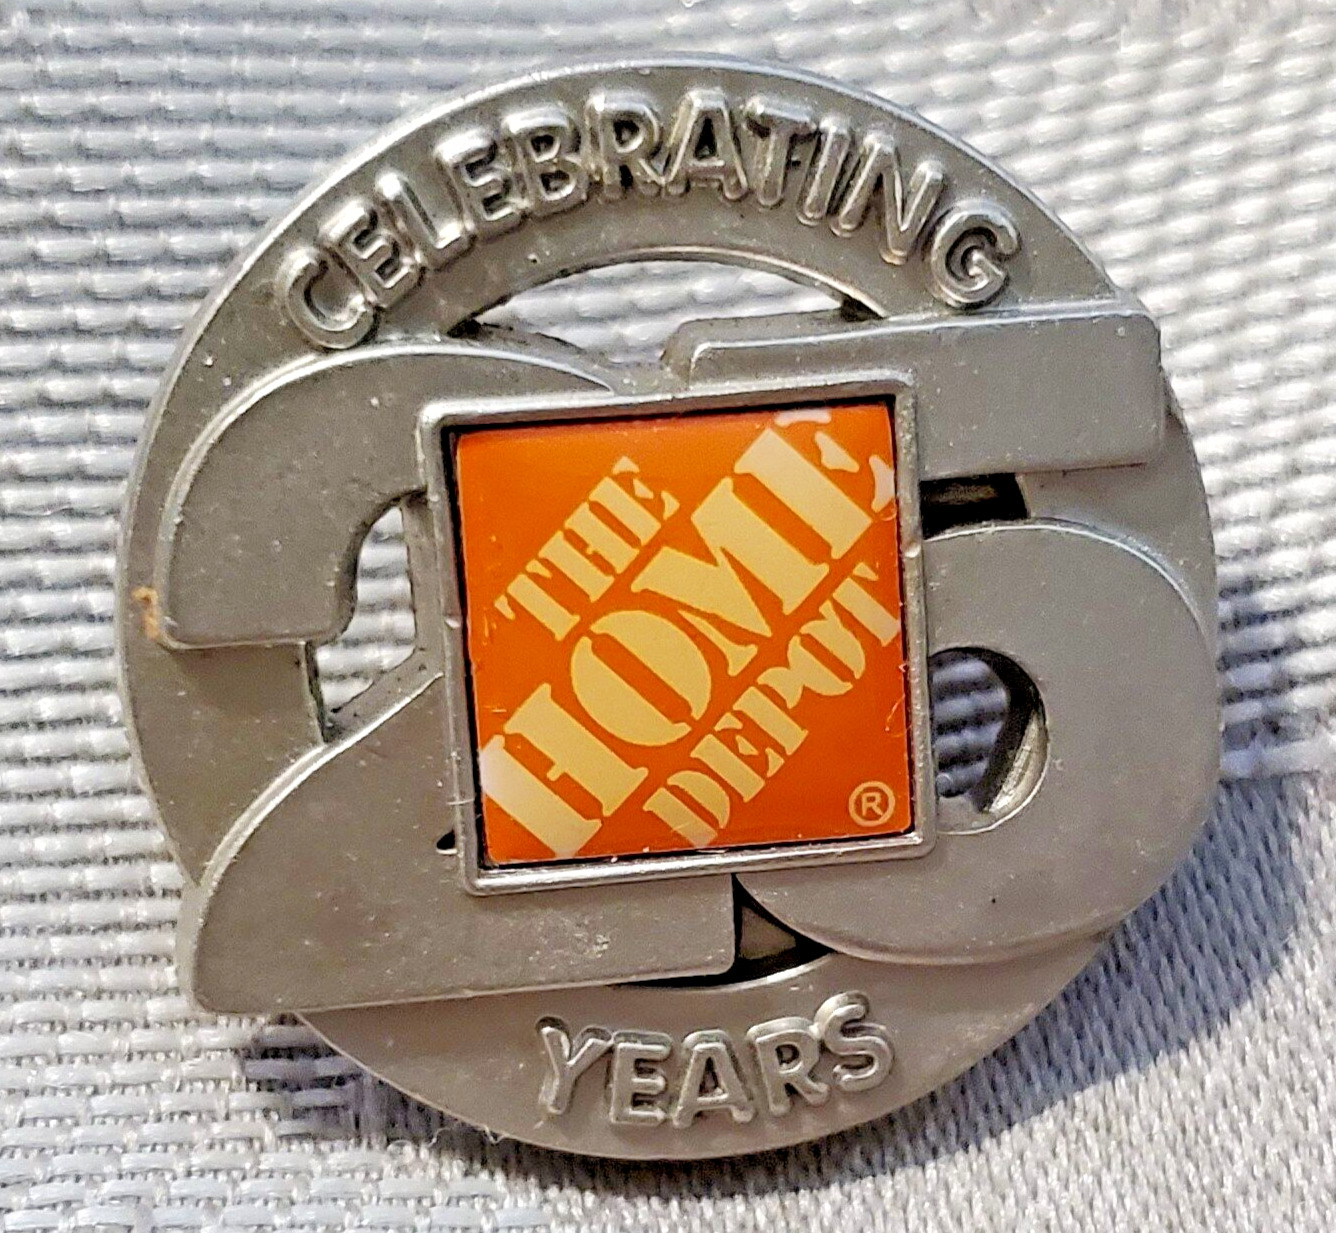 Preowned Silver / Pewter Color Home Depot Celebrating 25 Years Pin / Pinback